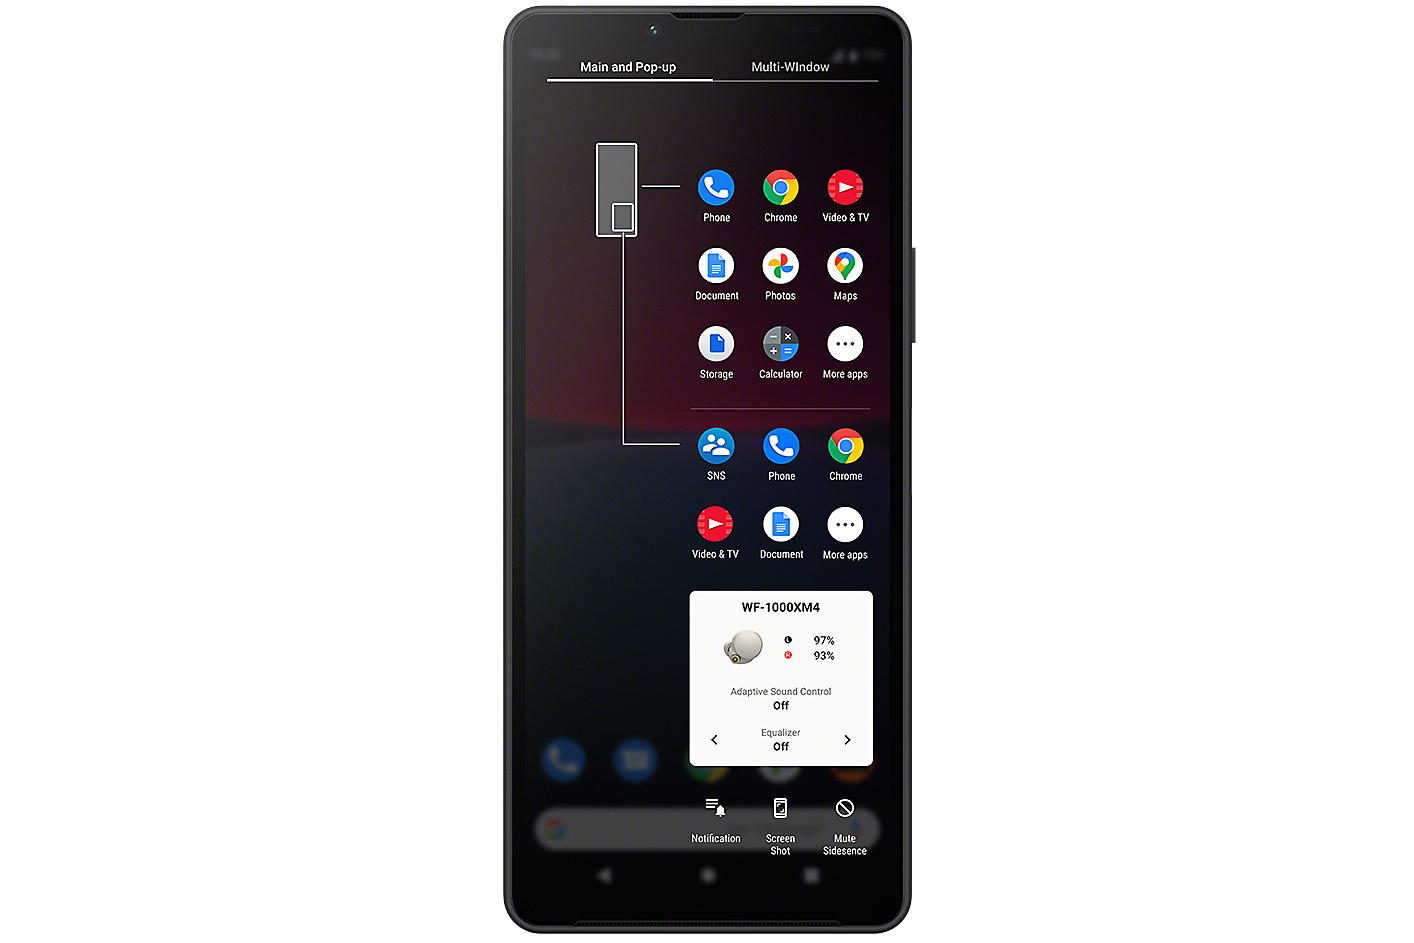 Xperia phone displaying the Window manager UI